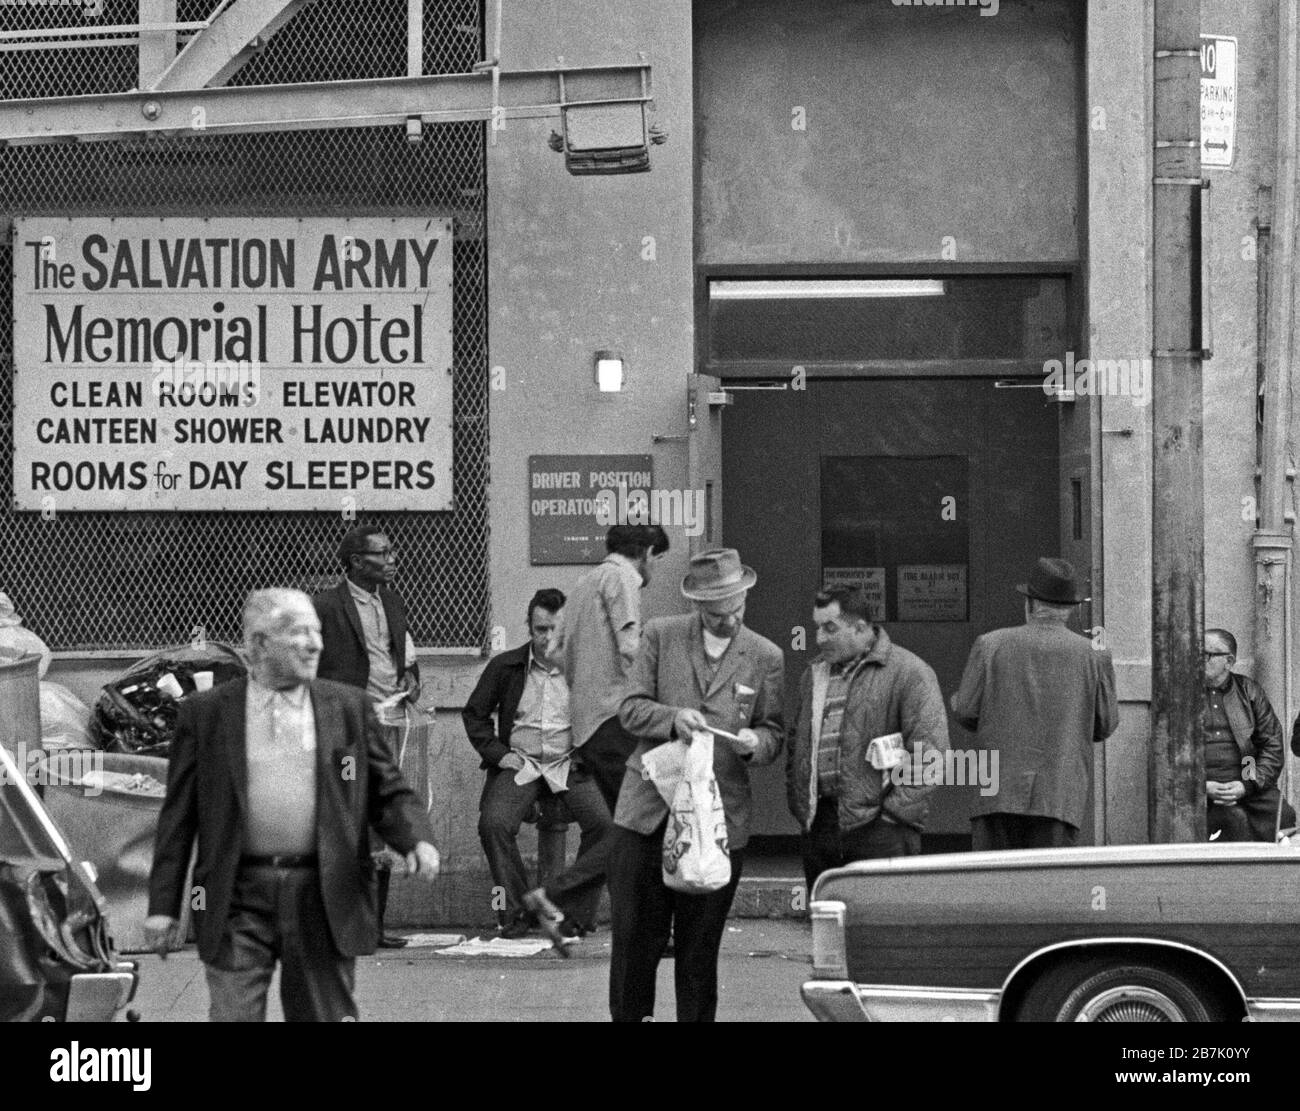 Film image, July 1970, Salvation Army Memorial Hotel for cheap rooms. Lower East Side, New York City. Stock Photo